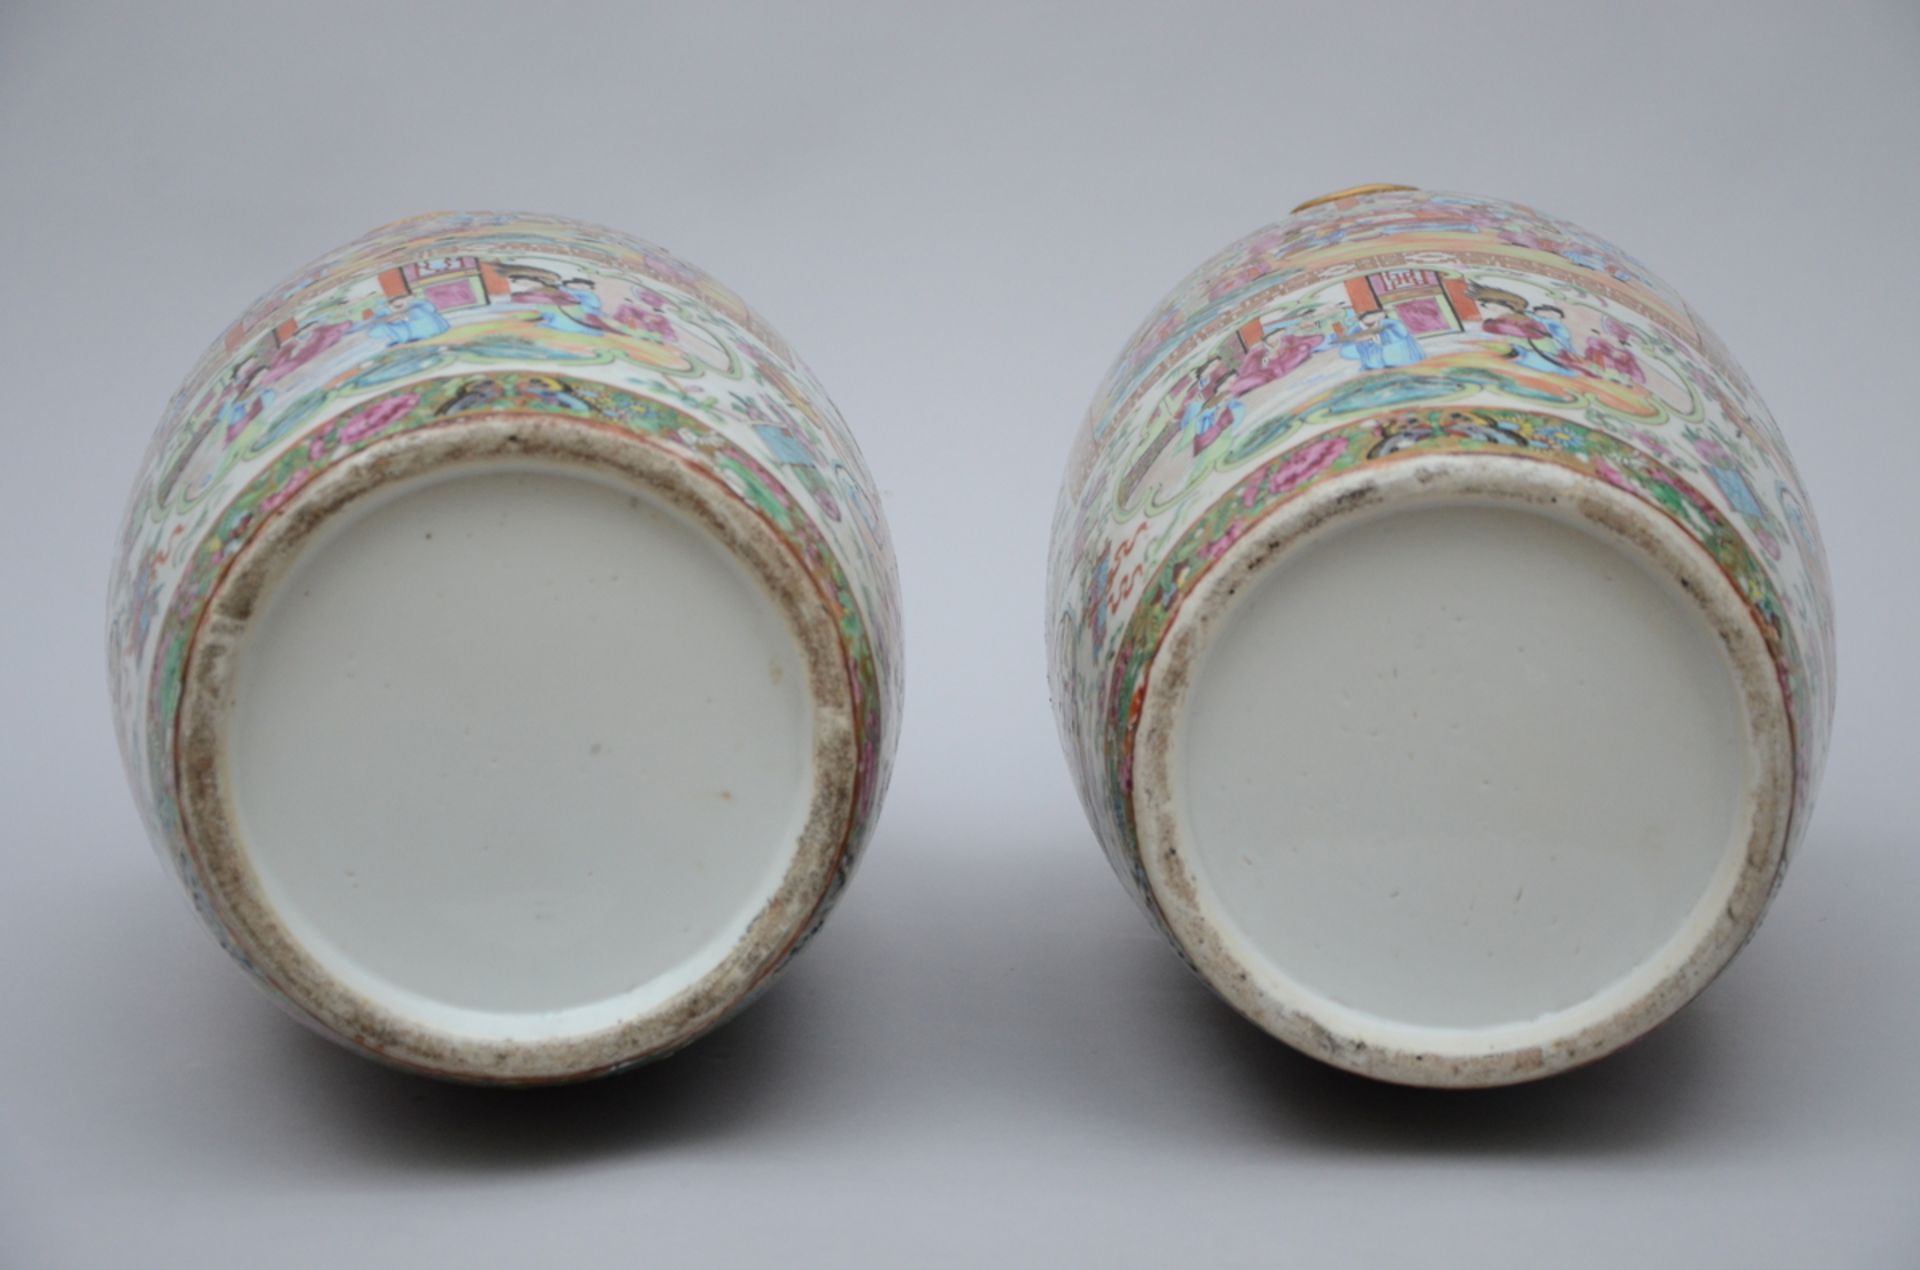 A pair of vases in Chinese porcelain 'gilt Canton', 19th century (62 cm) - Image 4 of 4